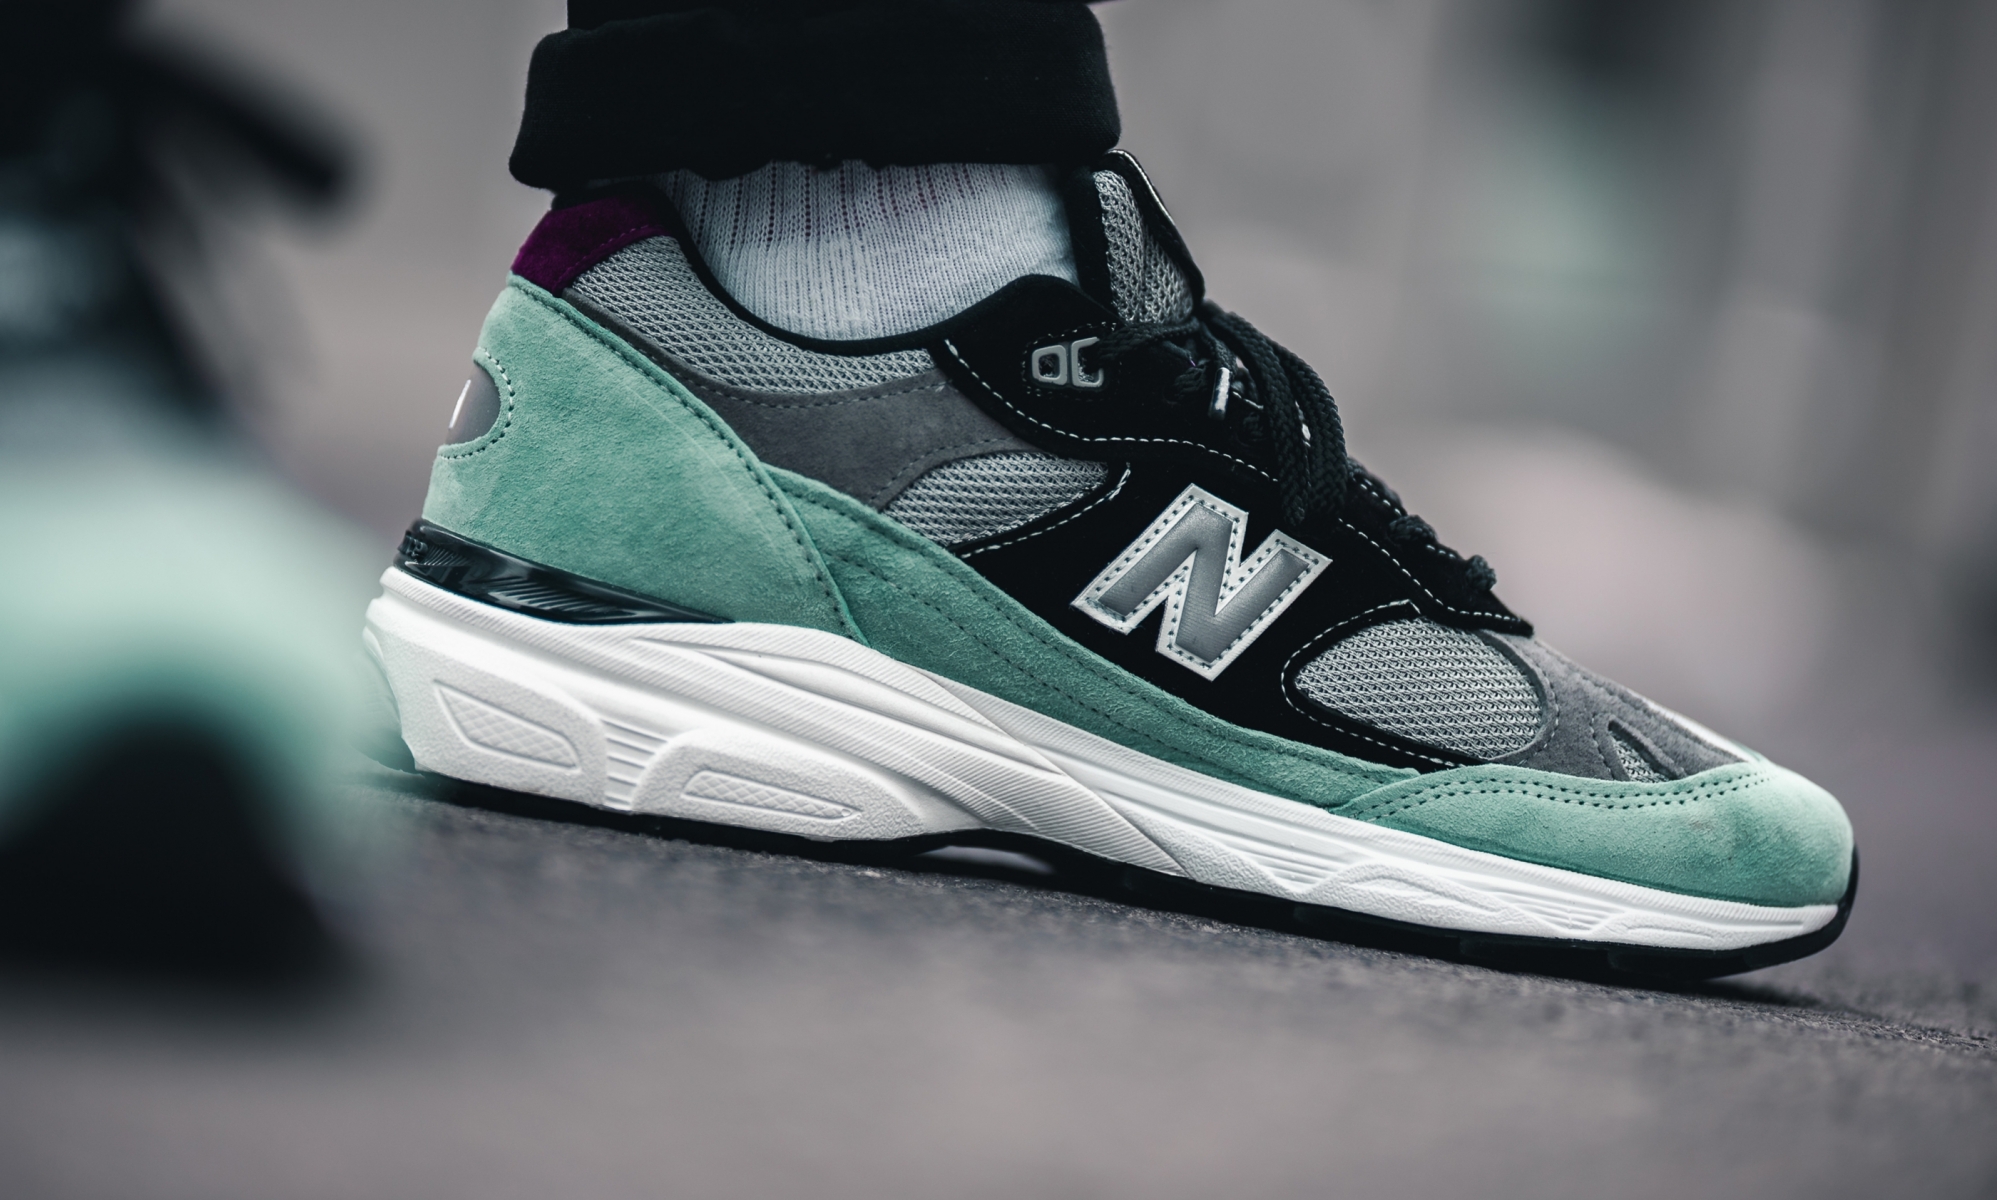 New Balance equips its 991.9 with a new 